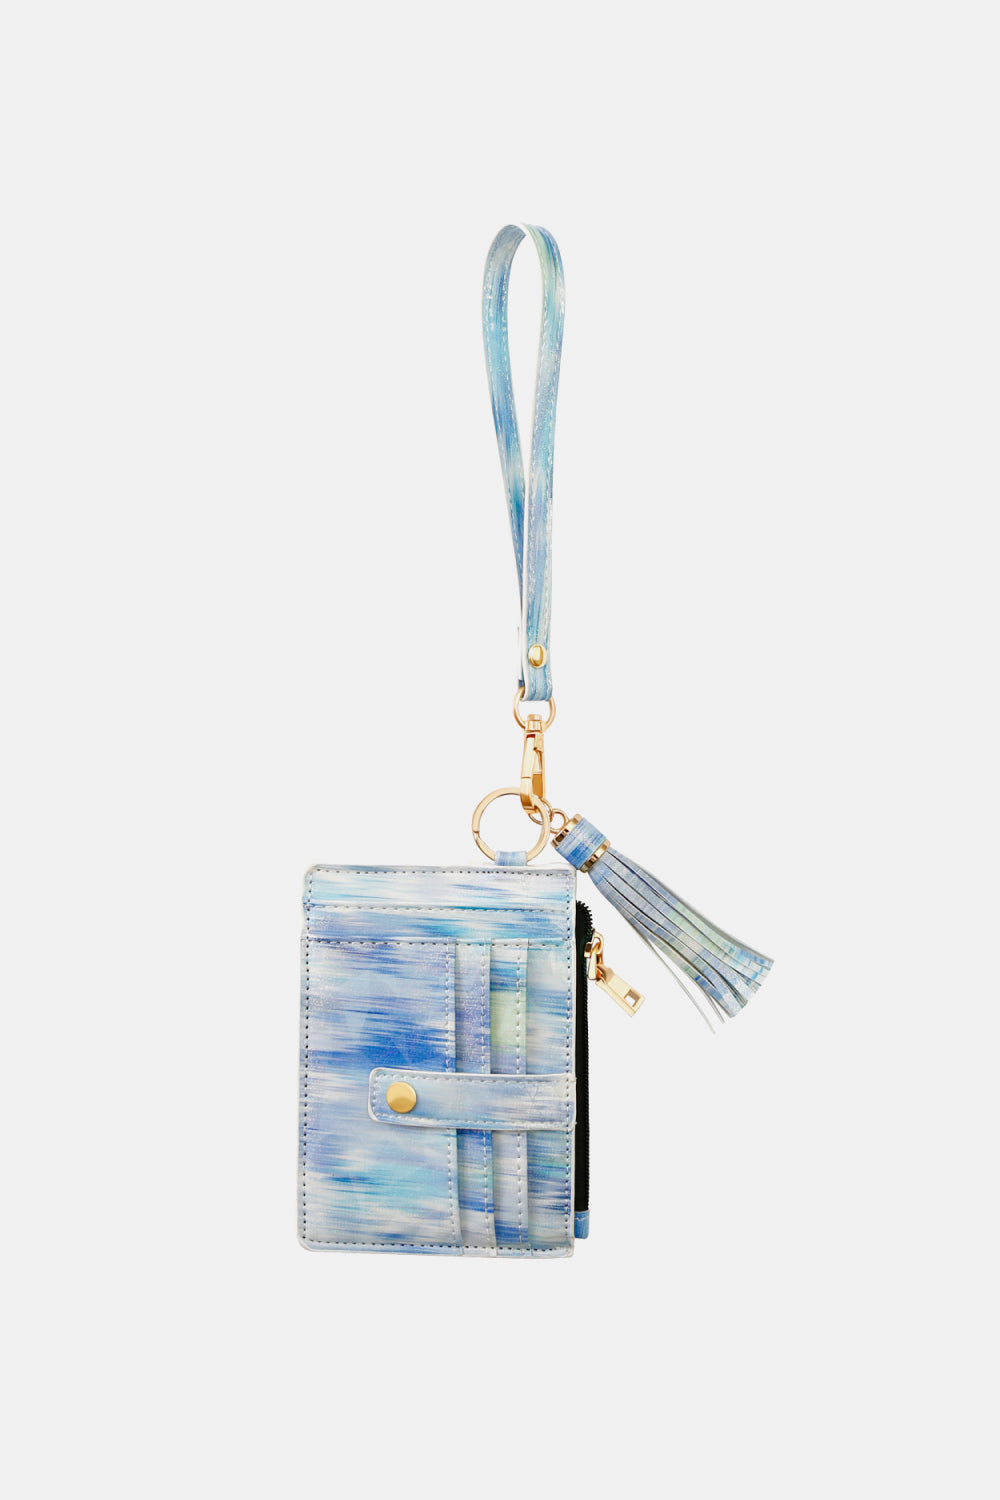 Trendsi Cupid Beauty Supplies Pastel Blue / One Size Keychains Printed Tassel Keychain with Wallet